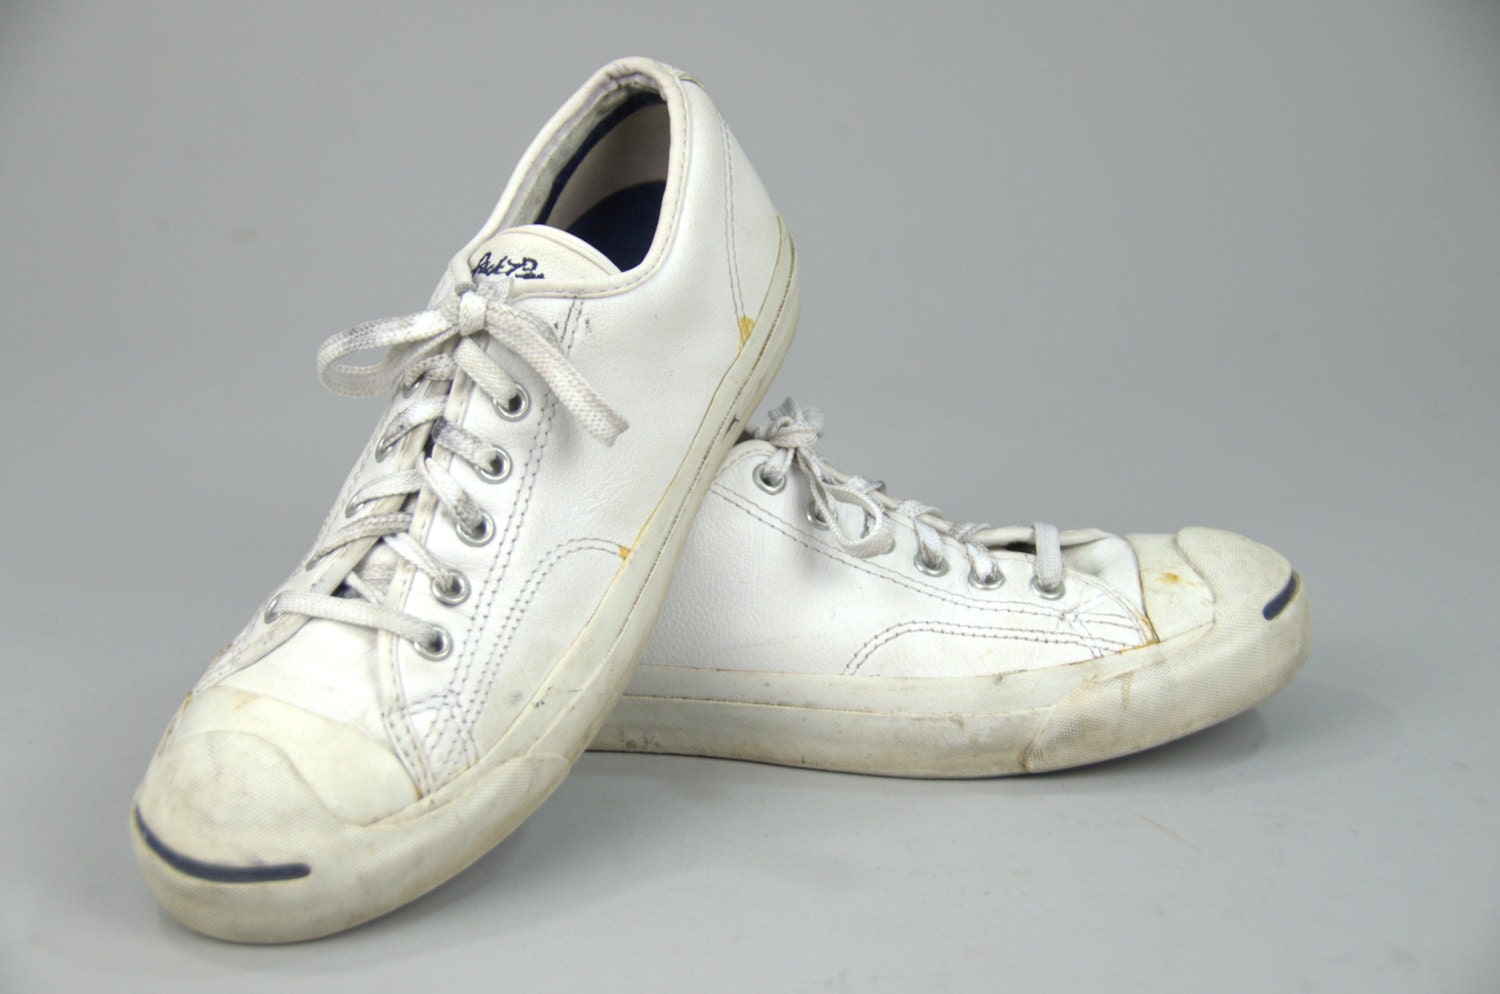 Vintage Converse Jack Purcell White Leather Tennis Shoes